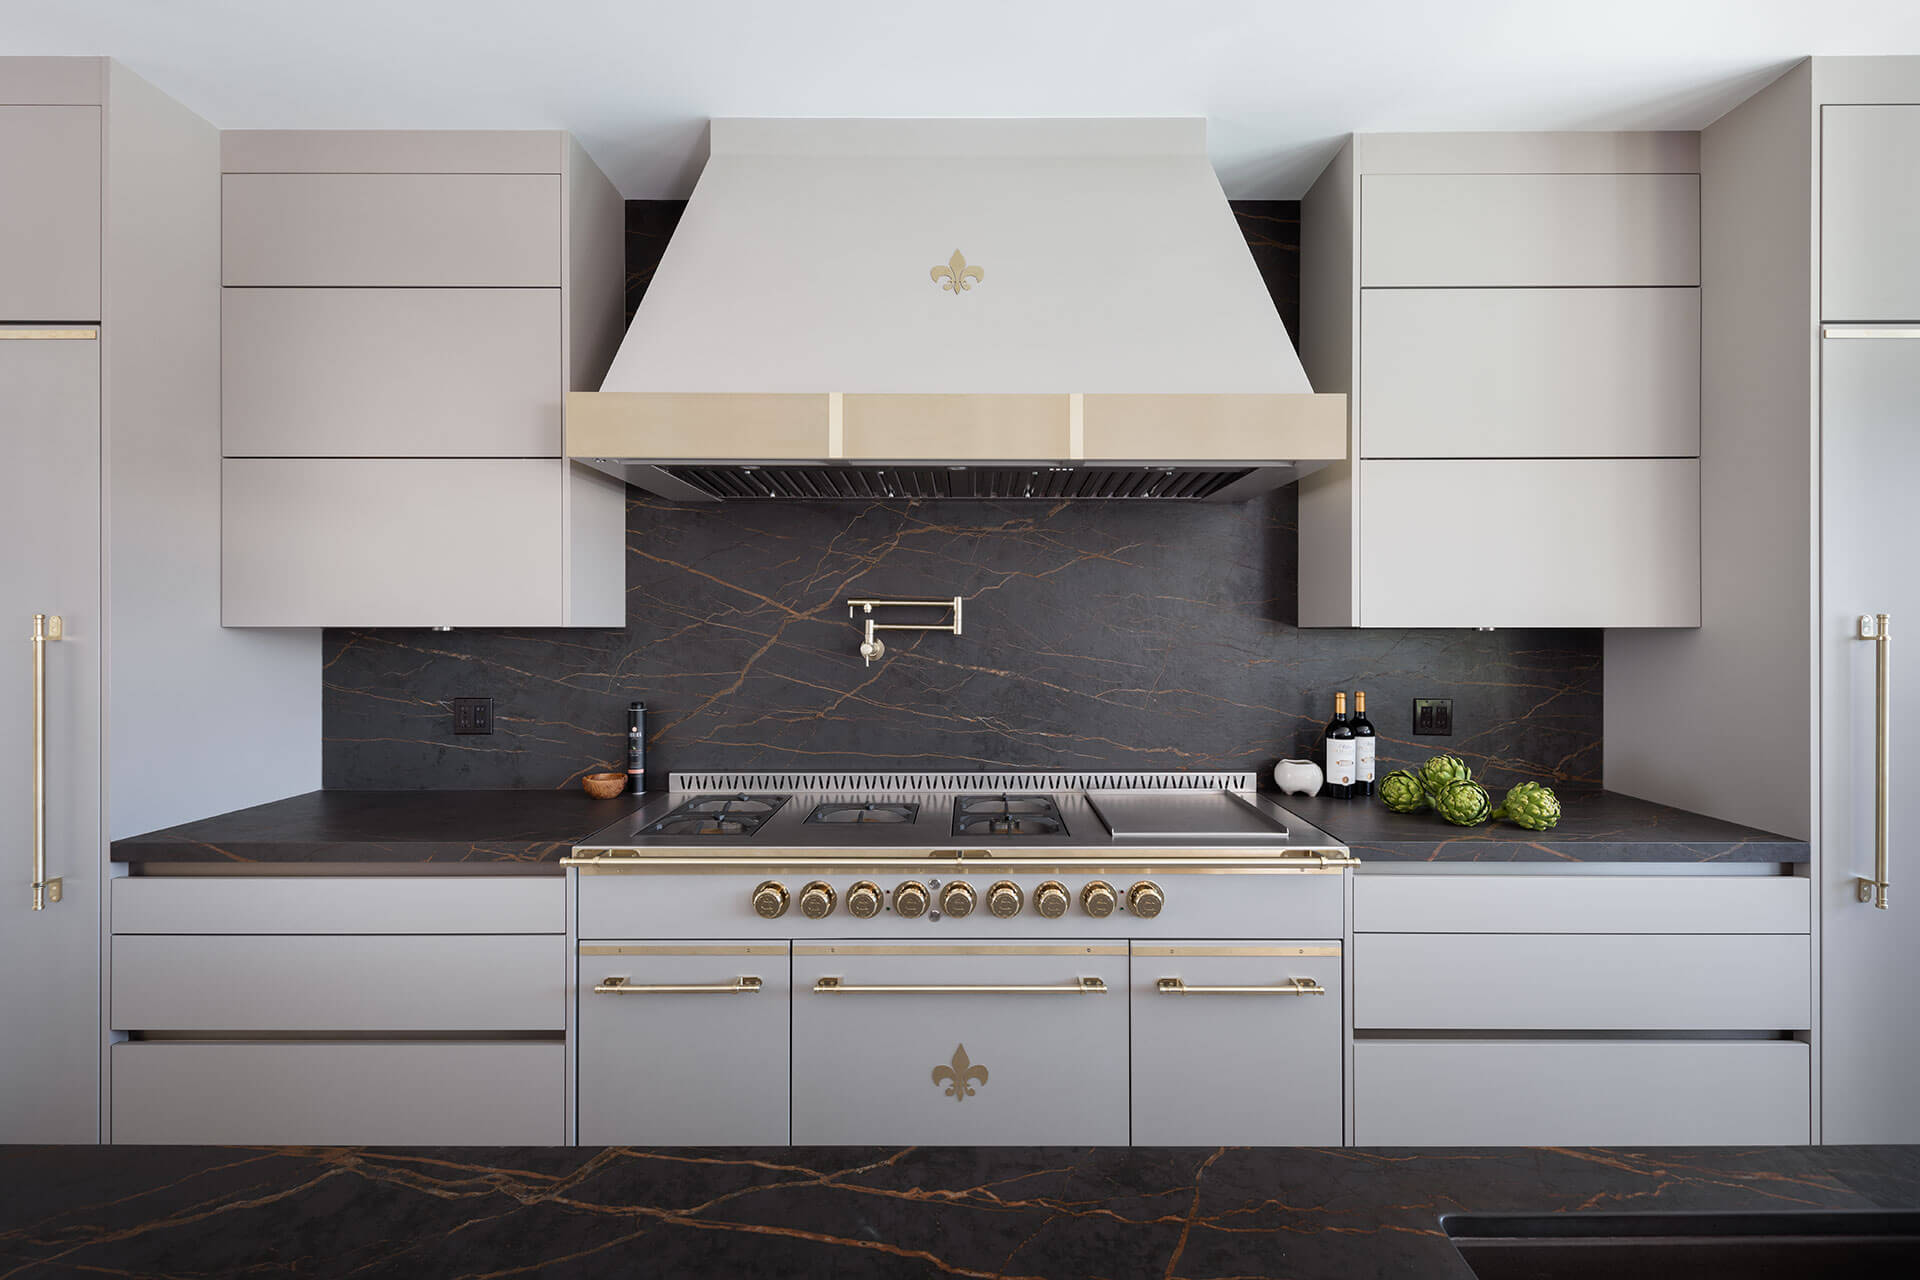 White French Kitchen Ranges With Golden Burners and Cabinet Handles